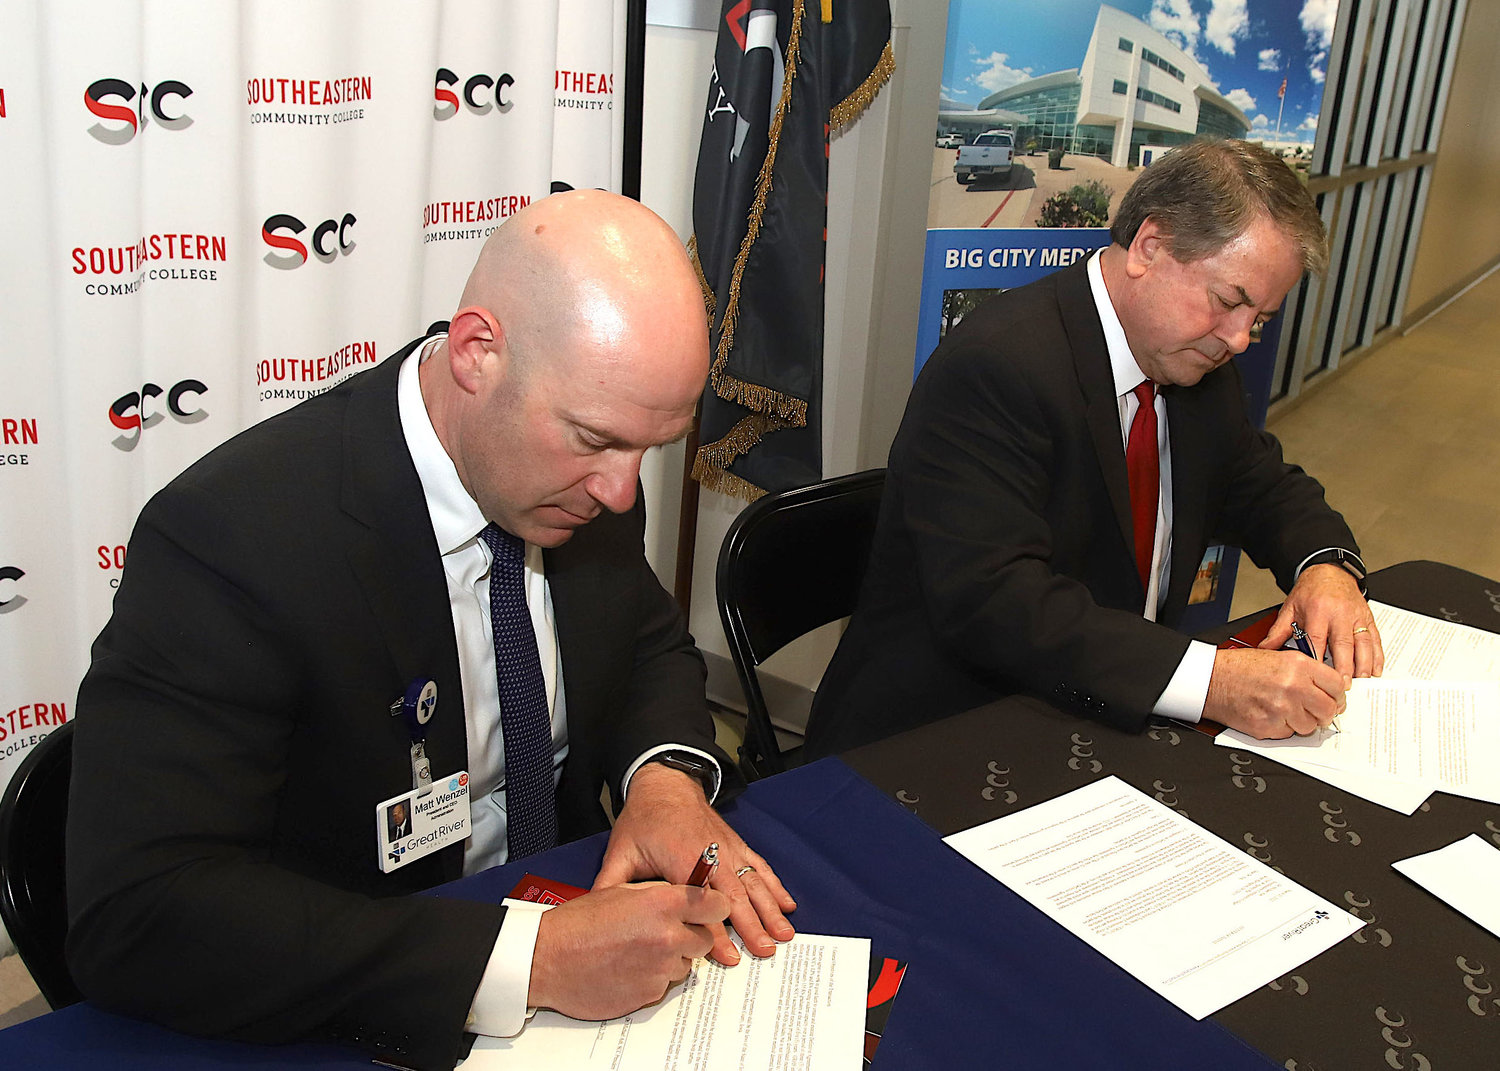 Southeastern Community College and Great River Health sign a partnership deal Wednesday March 23, 2022 in the Health Professions Center on the campus in West Burlington, Iowa. [John Gaines Photography]